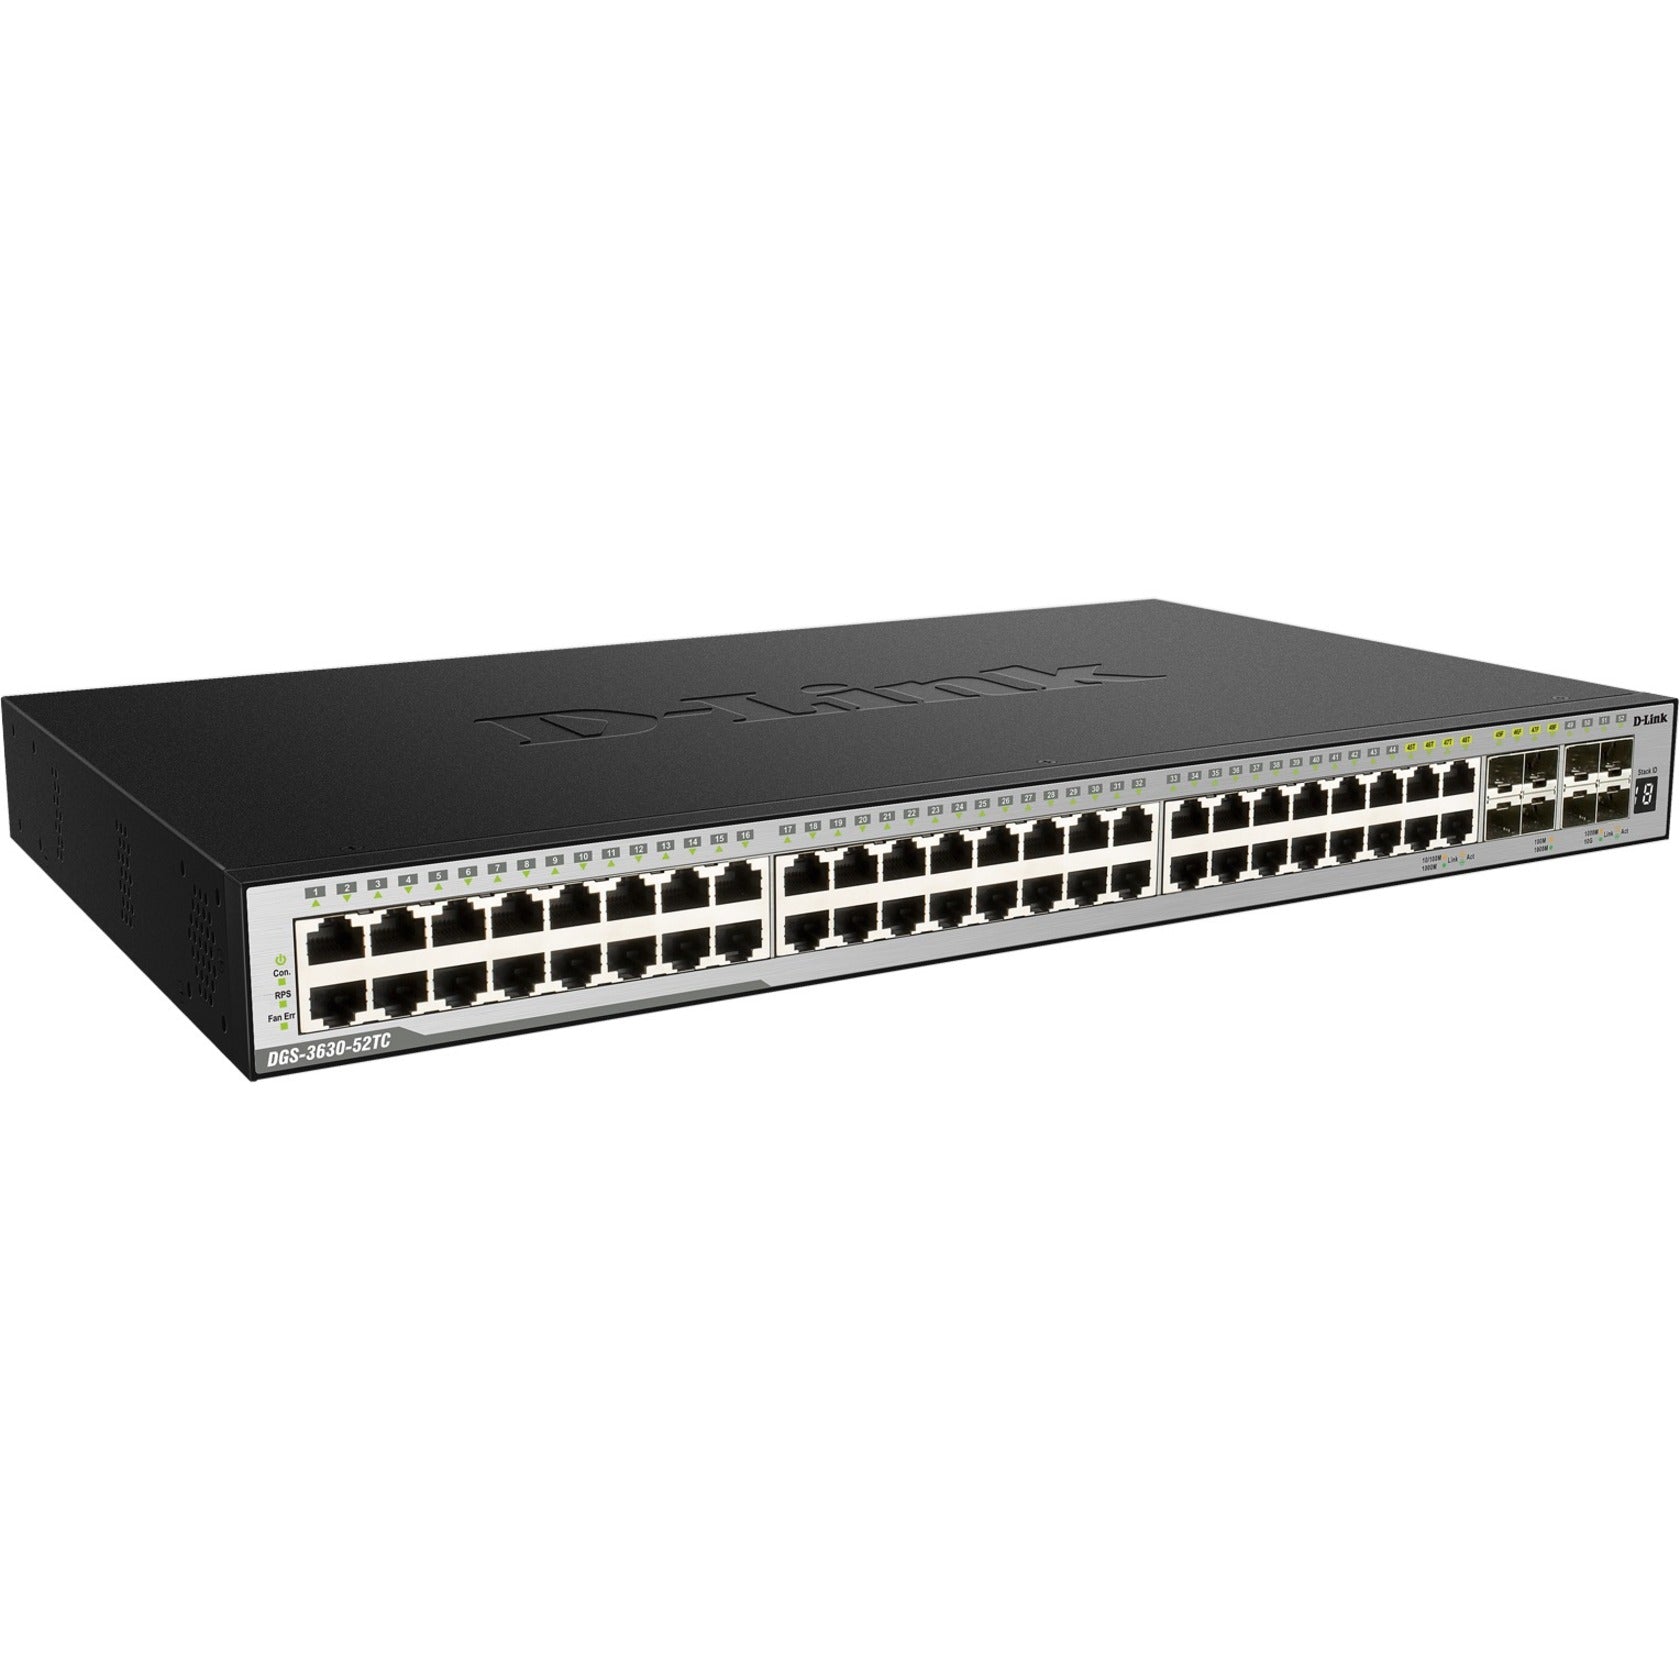 D-Link DGS-3630-52TC/SI 52-Port Layer 3 Stackable Managed Gigabit Switch, 4 10GbE Ports